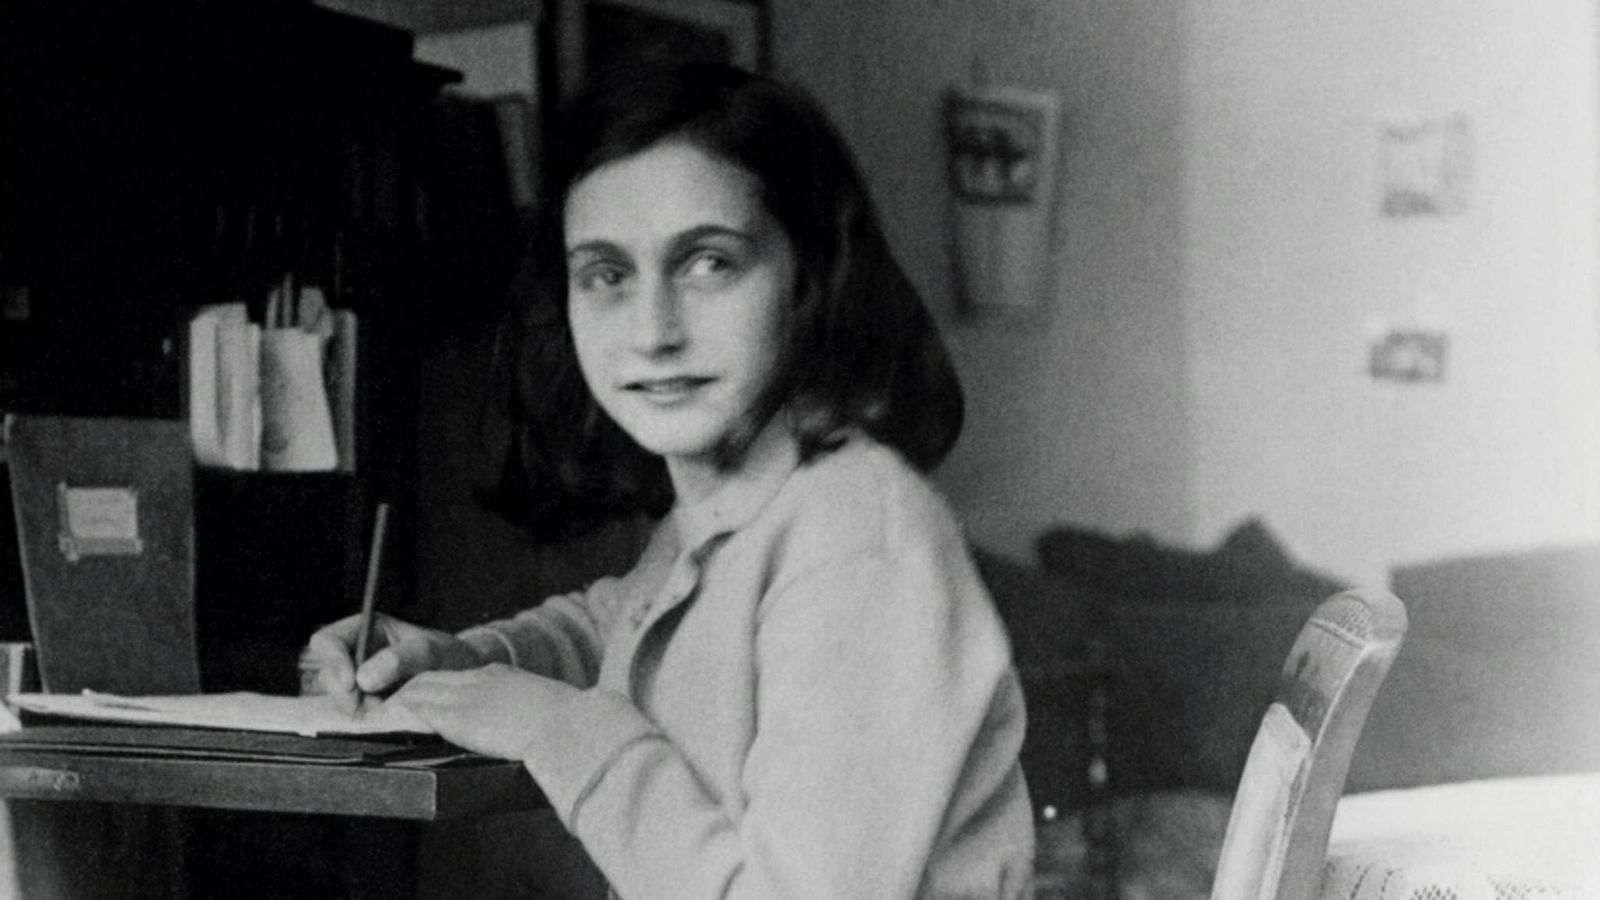 Anne Frank betrayal suspect named by researchers after new investigation